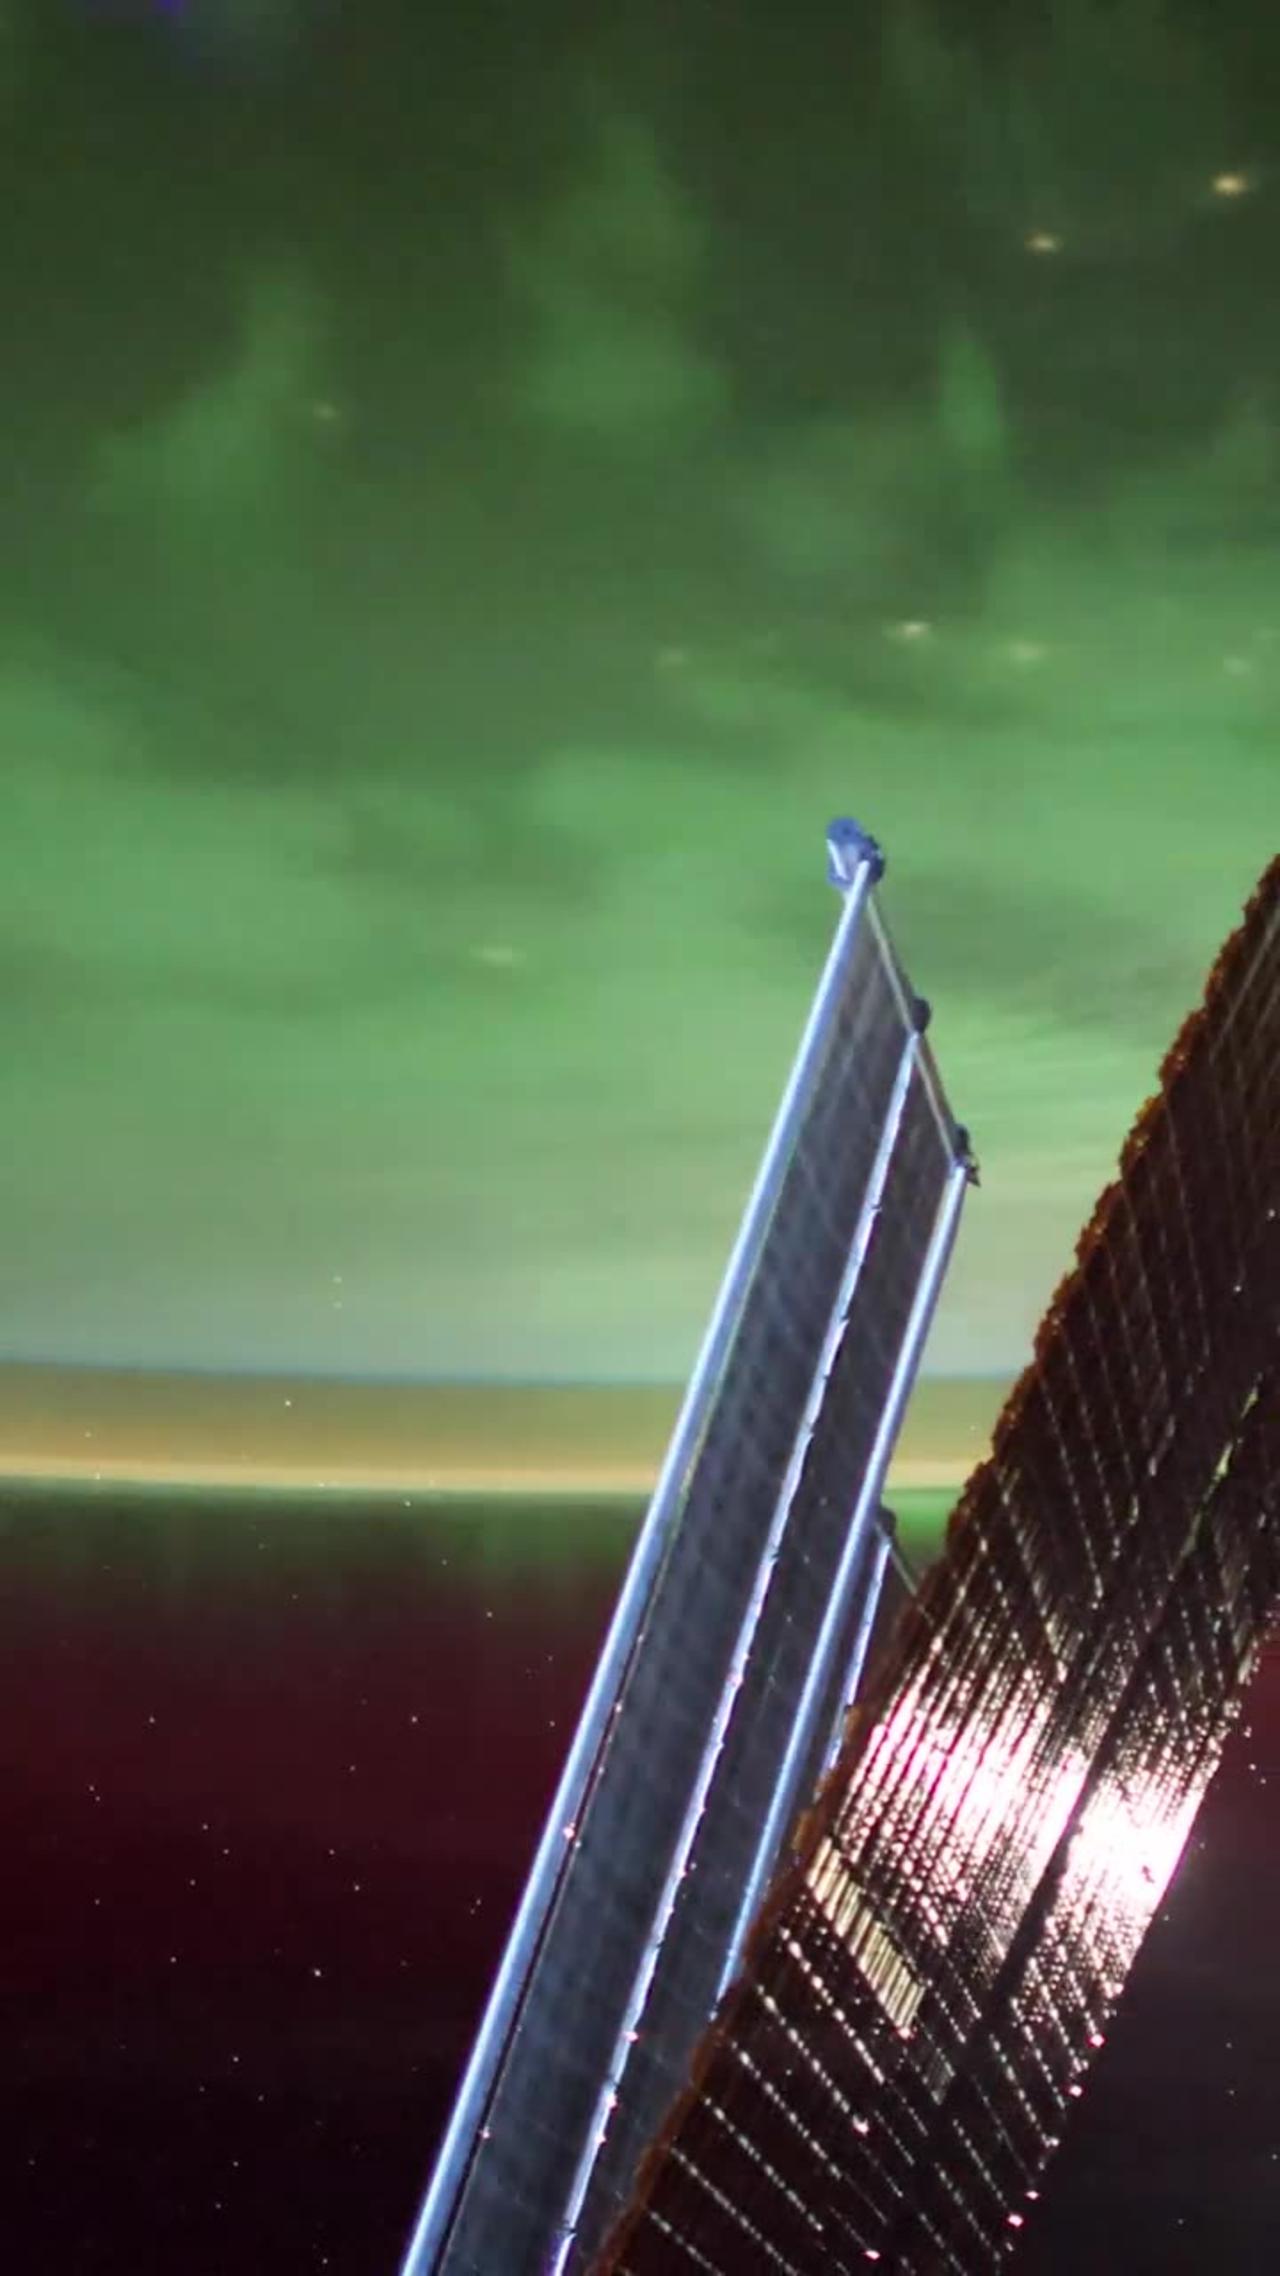 Northern light seen from the international space station